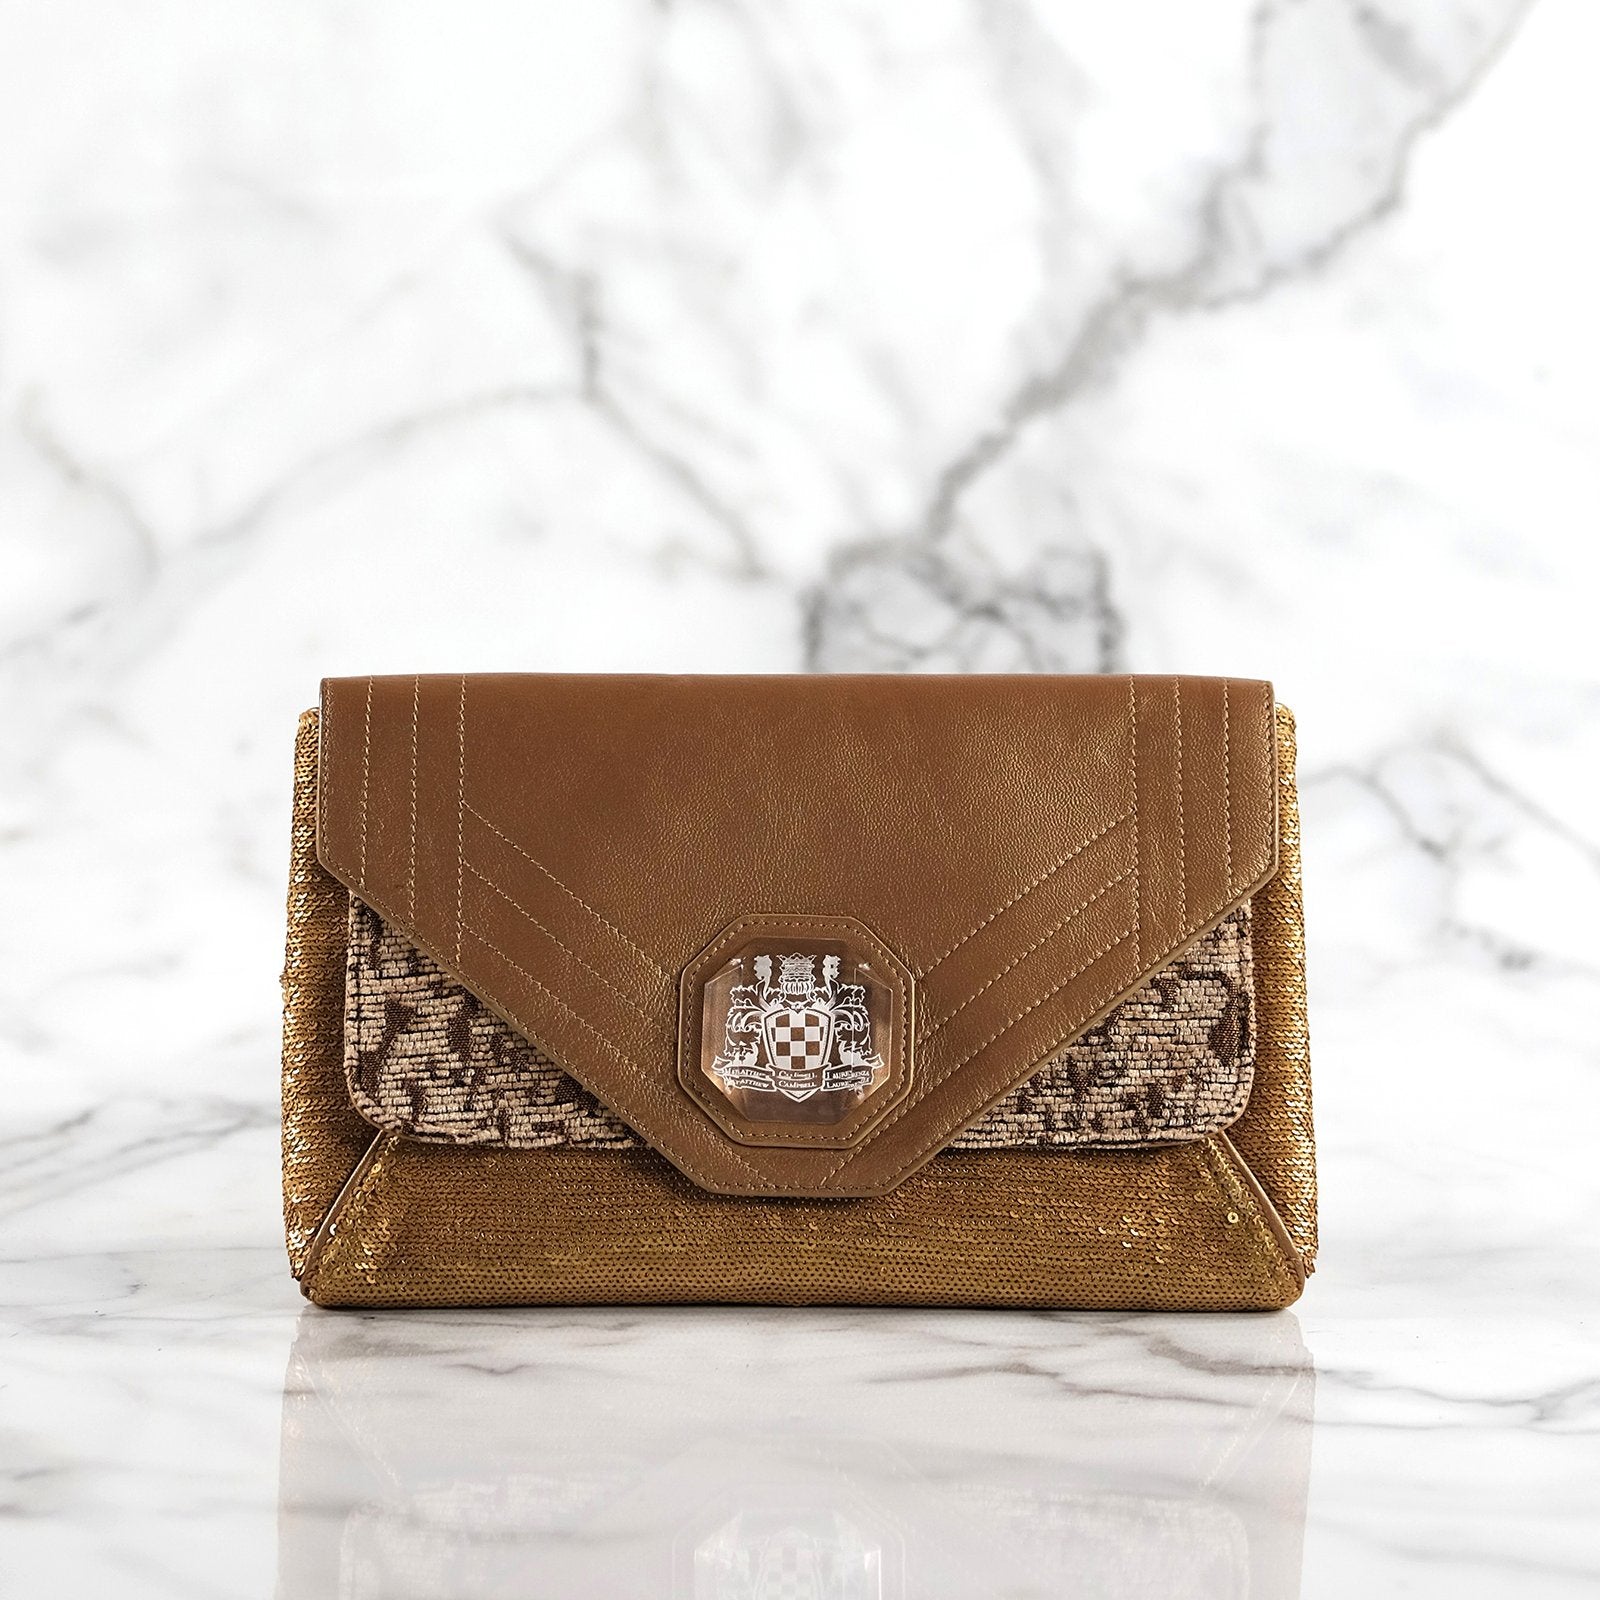 Phoebe tan leather and sequin handbag with desert camo embroidery